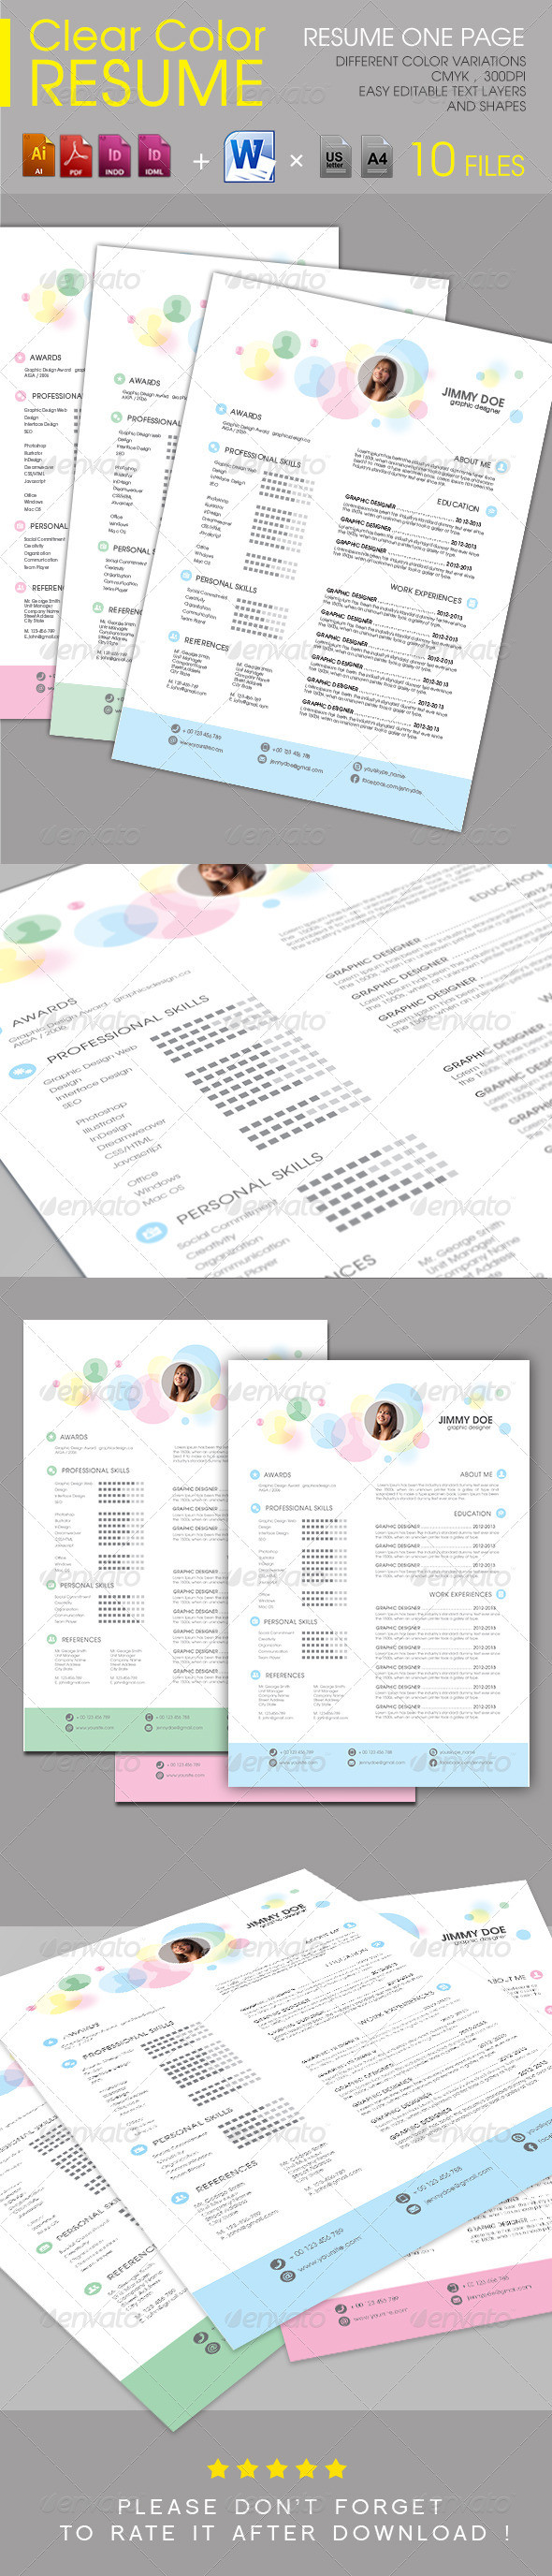 Clear color resume preview